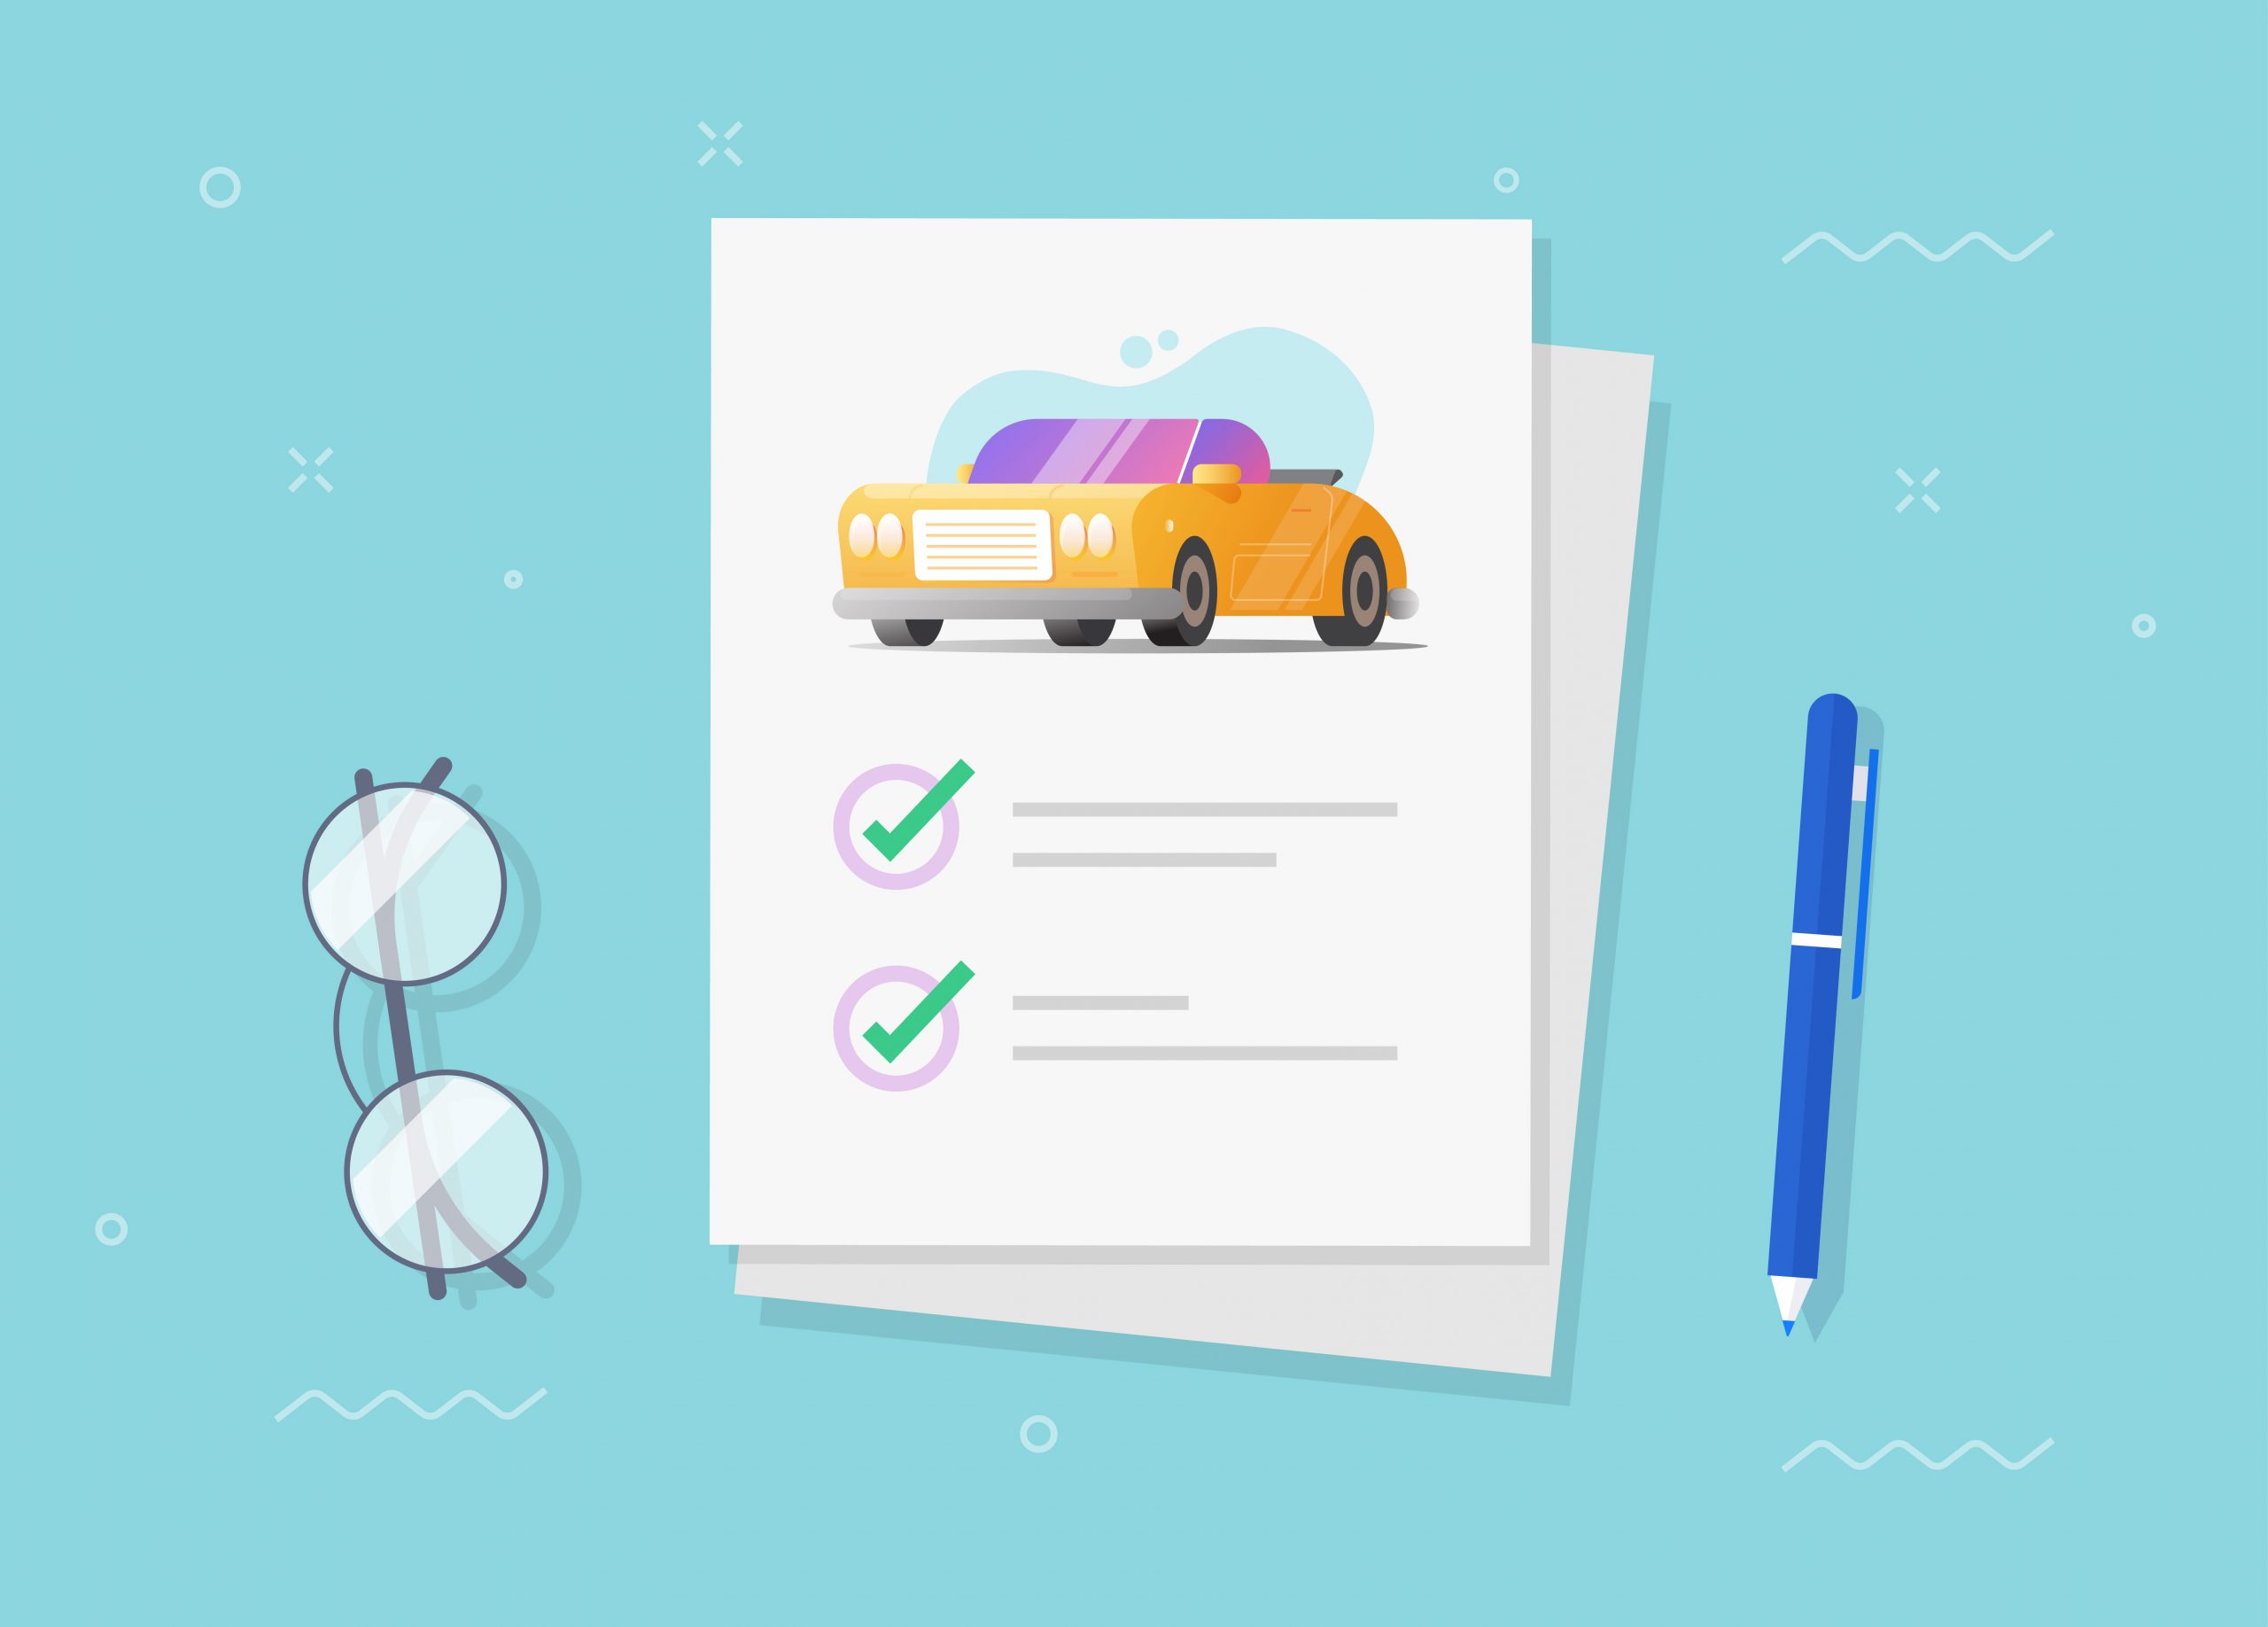 5 Things to Look Out for in Motor Insurance Plans